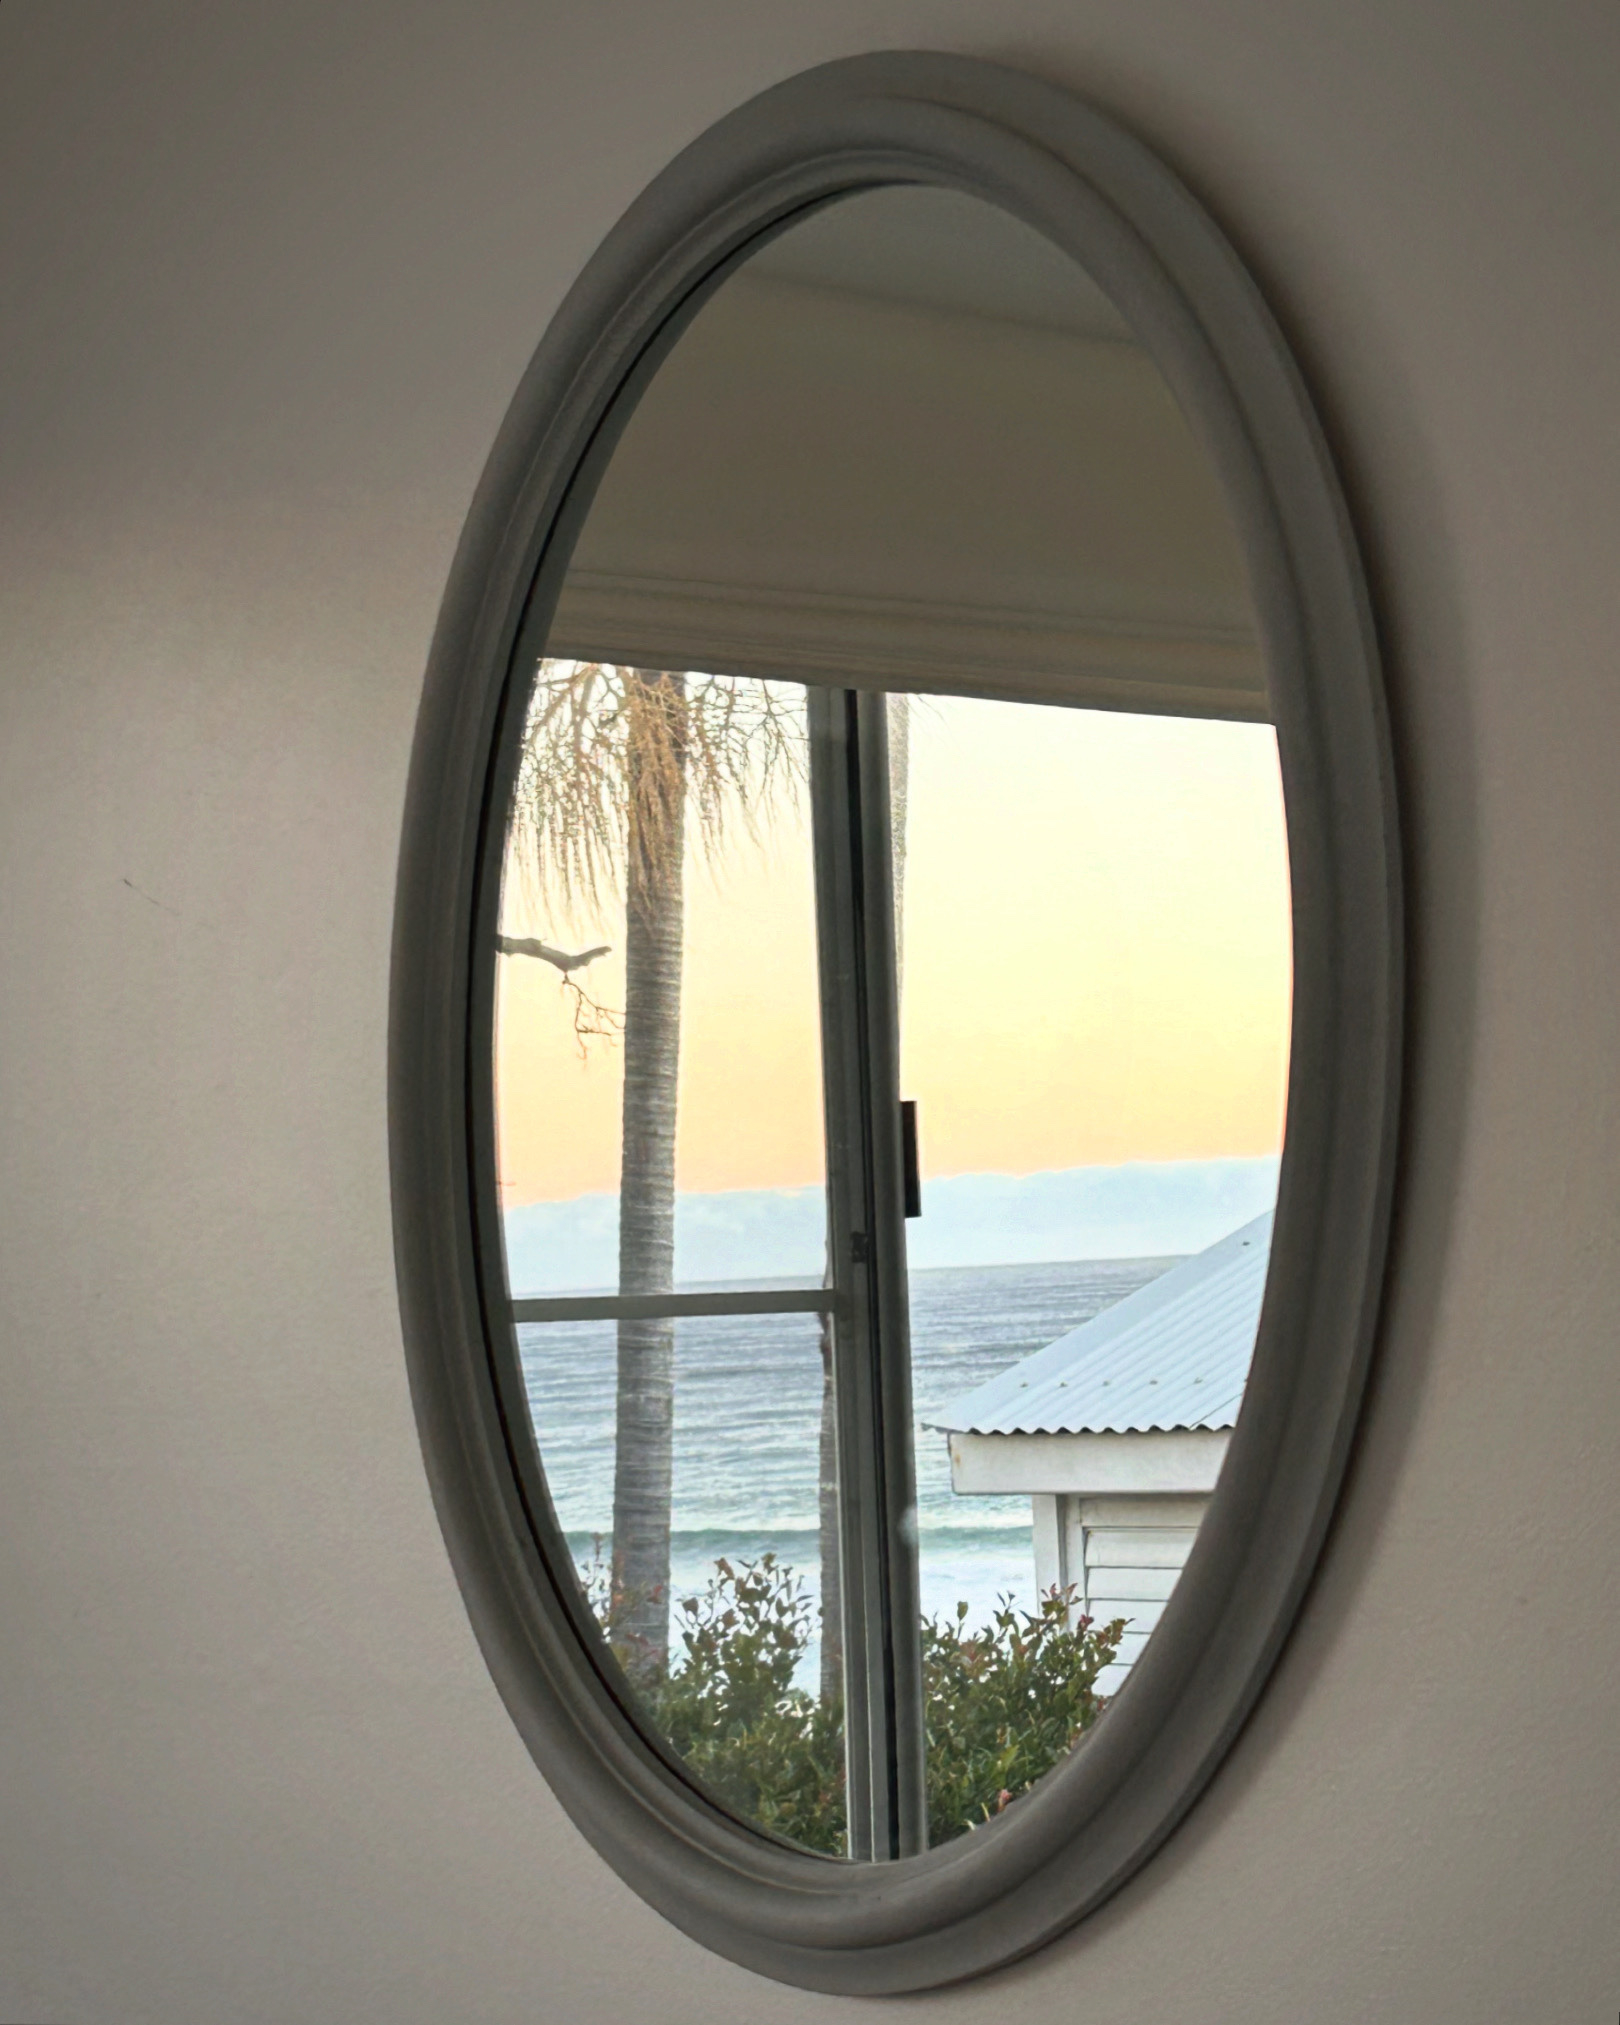 A circular mirror, reflecting a view of the ocean in the distance 